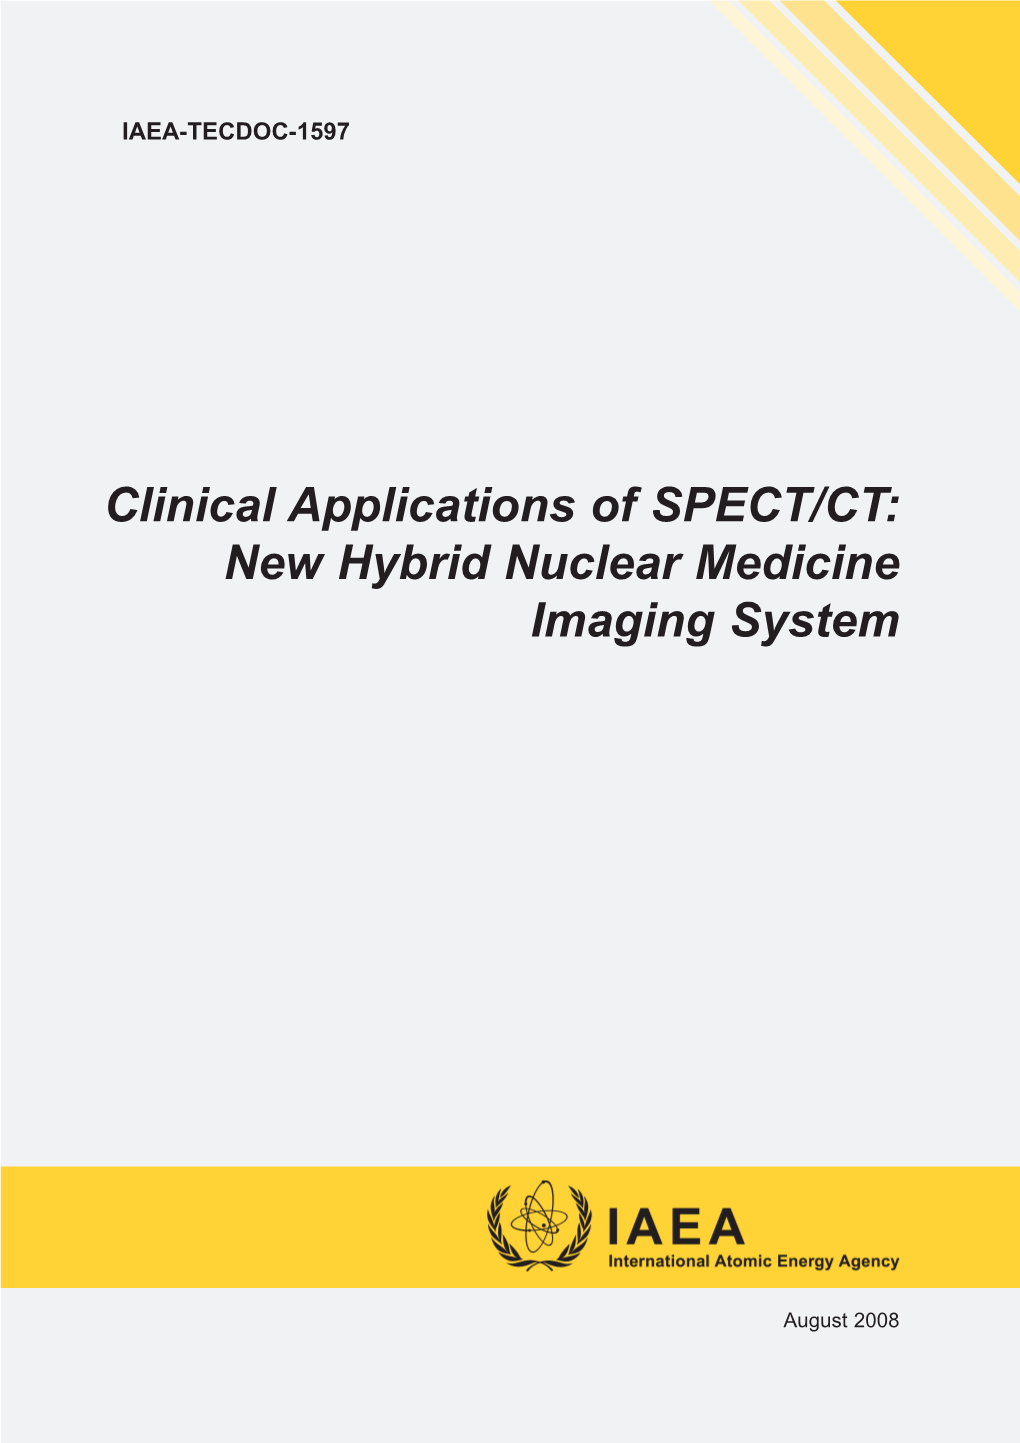 Clinical Applications of SPECT/CT: New Hybrid Nuclear Medicine Imaging System